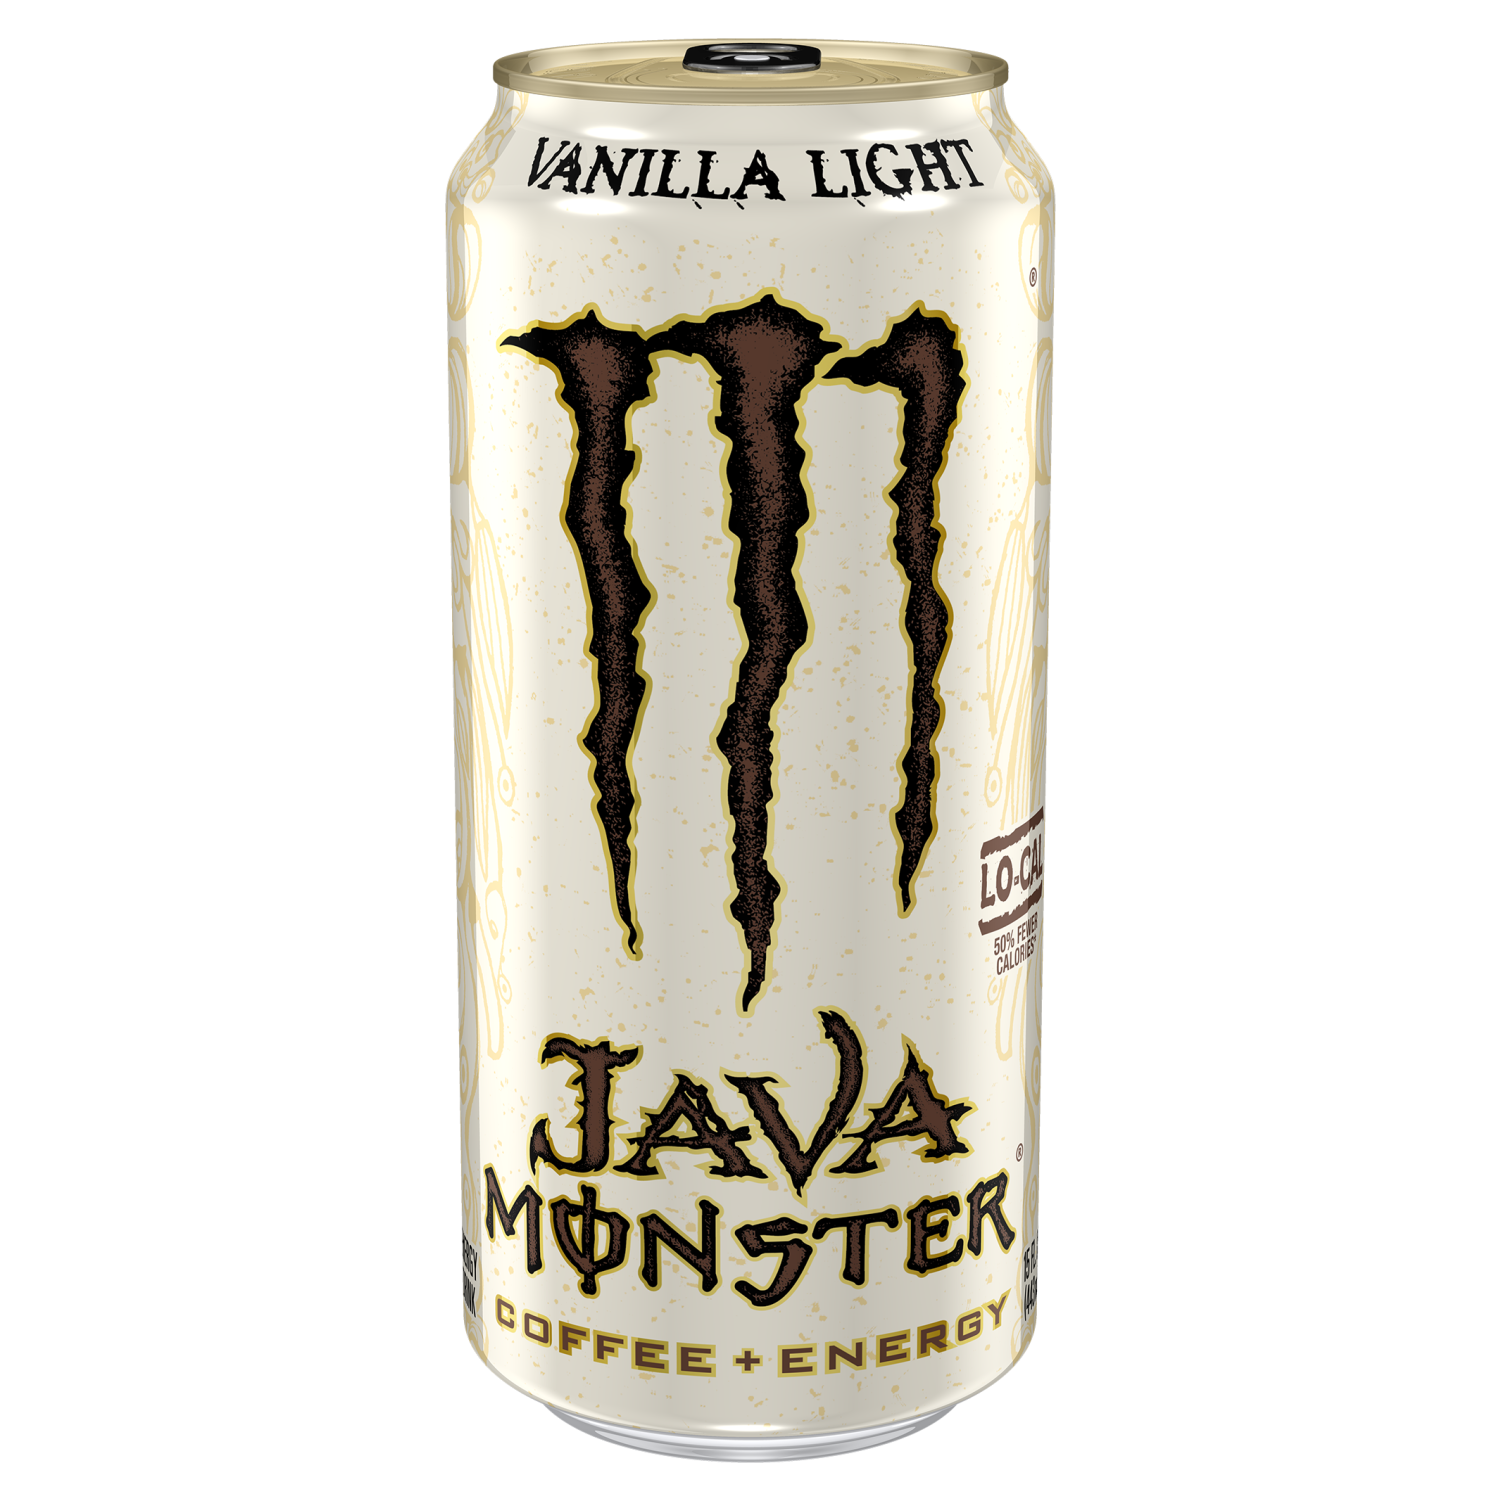 slide 4 of 5, Monster Energy How low can you go? Ounce for ounce Java Monster already has way less fat and calories than “Mega Bucks” bottled coffee. So why make Vanilla Light? Because our fearless leader is a health fanatic who counts calories like they're $100 dollar bills. Art vs. Science - Seriously, making a low calorie coffee + energy drink that tastes good and works, ain't that easy. Java Monster Vanilla Light sets a new standard for taste and effectiveness. Java Monster… premium coffee and cream brewed up with killer flavor, supercharged with Monster energy blend., 15 oz